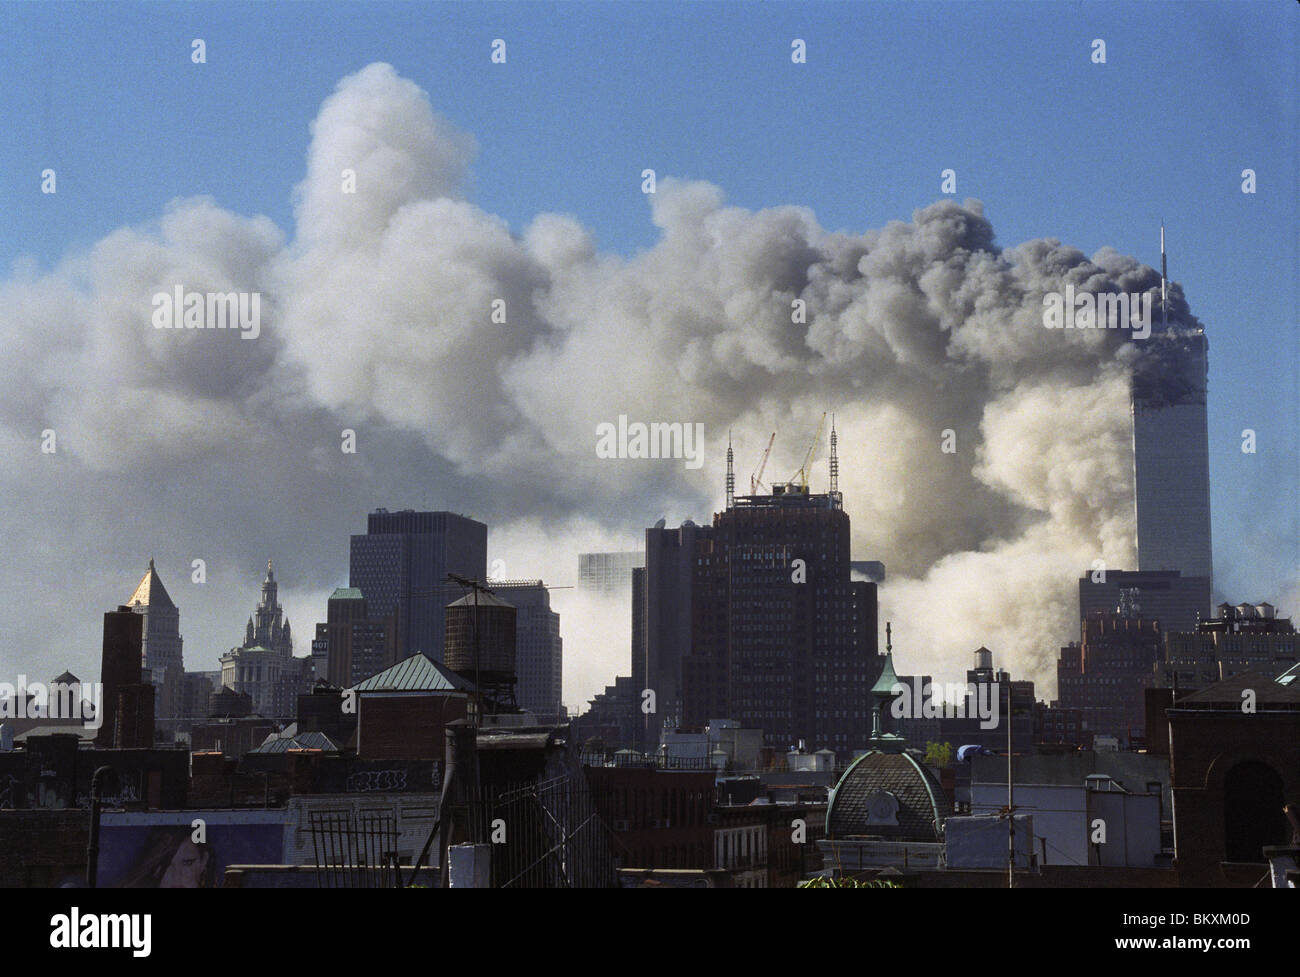 At  9:59 a.m, the south tower, 2 World Trade Center, collapsed after being hit by a plane. ©Stacy Walsh Rosenstock/Alamy Stock Photo